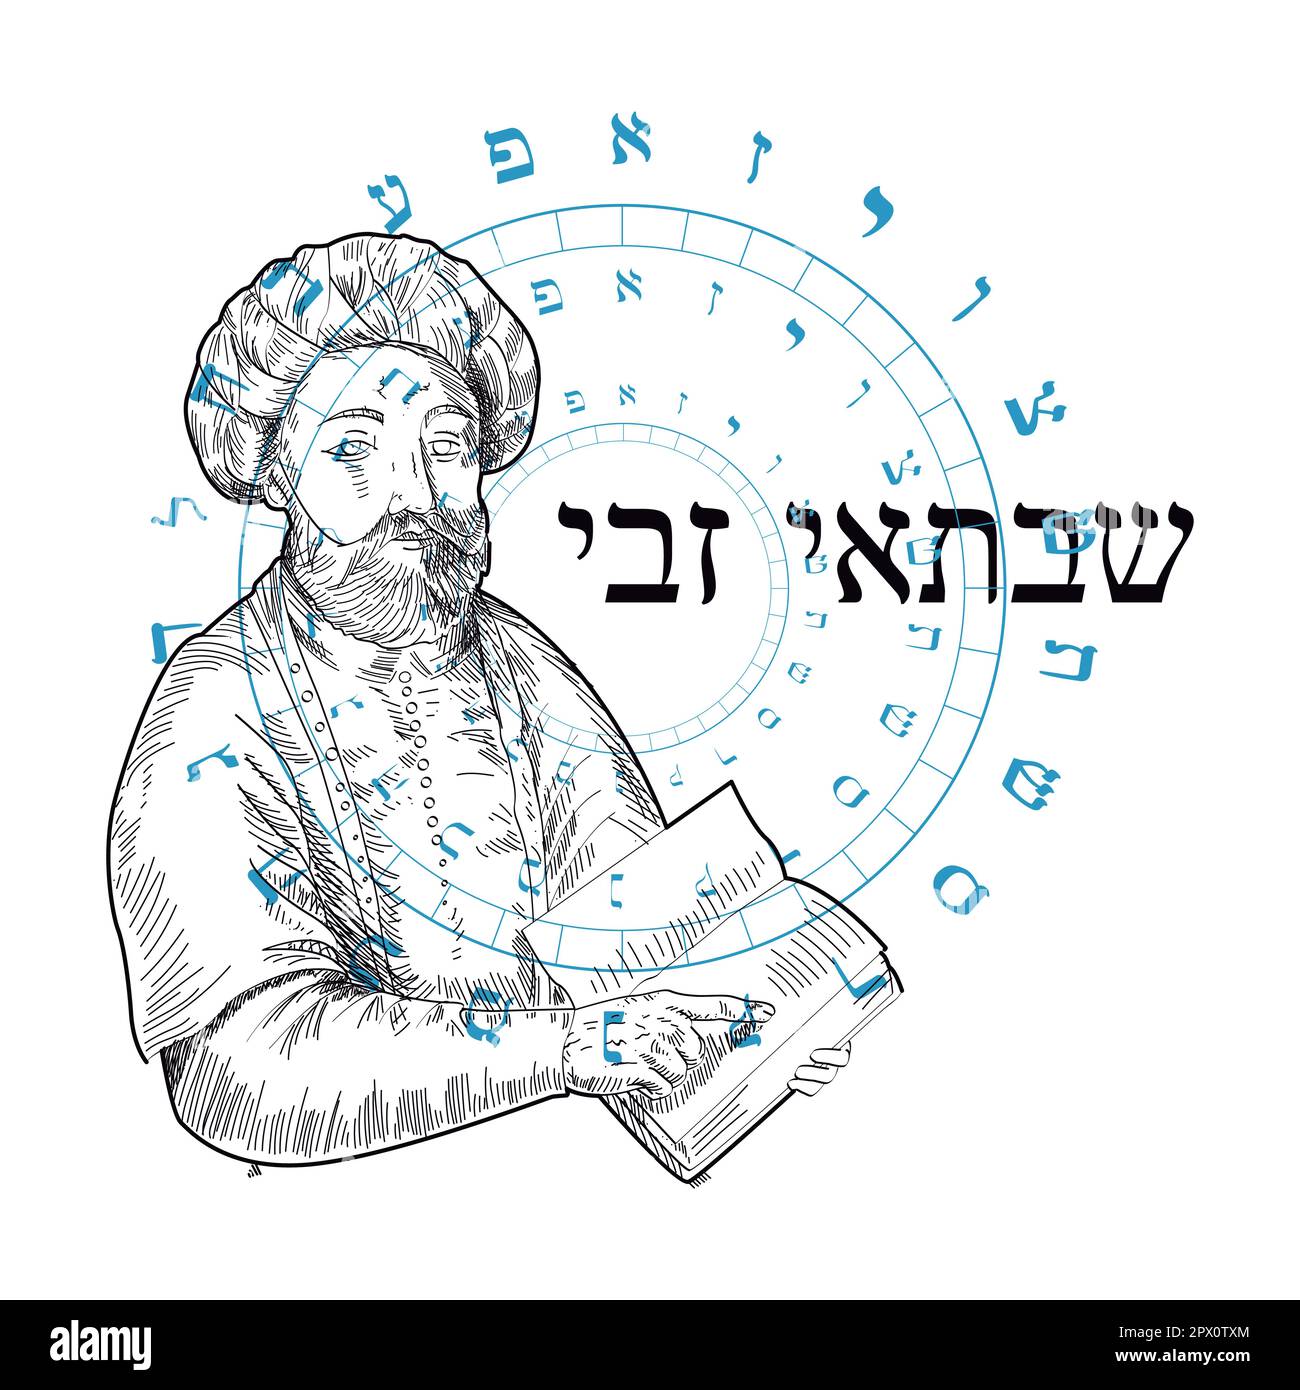 Illustration of a false messiah from the history of the Hebrew people. Jewish prophet of medieval times. Hebrew alphabet. Stock Vector